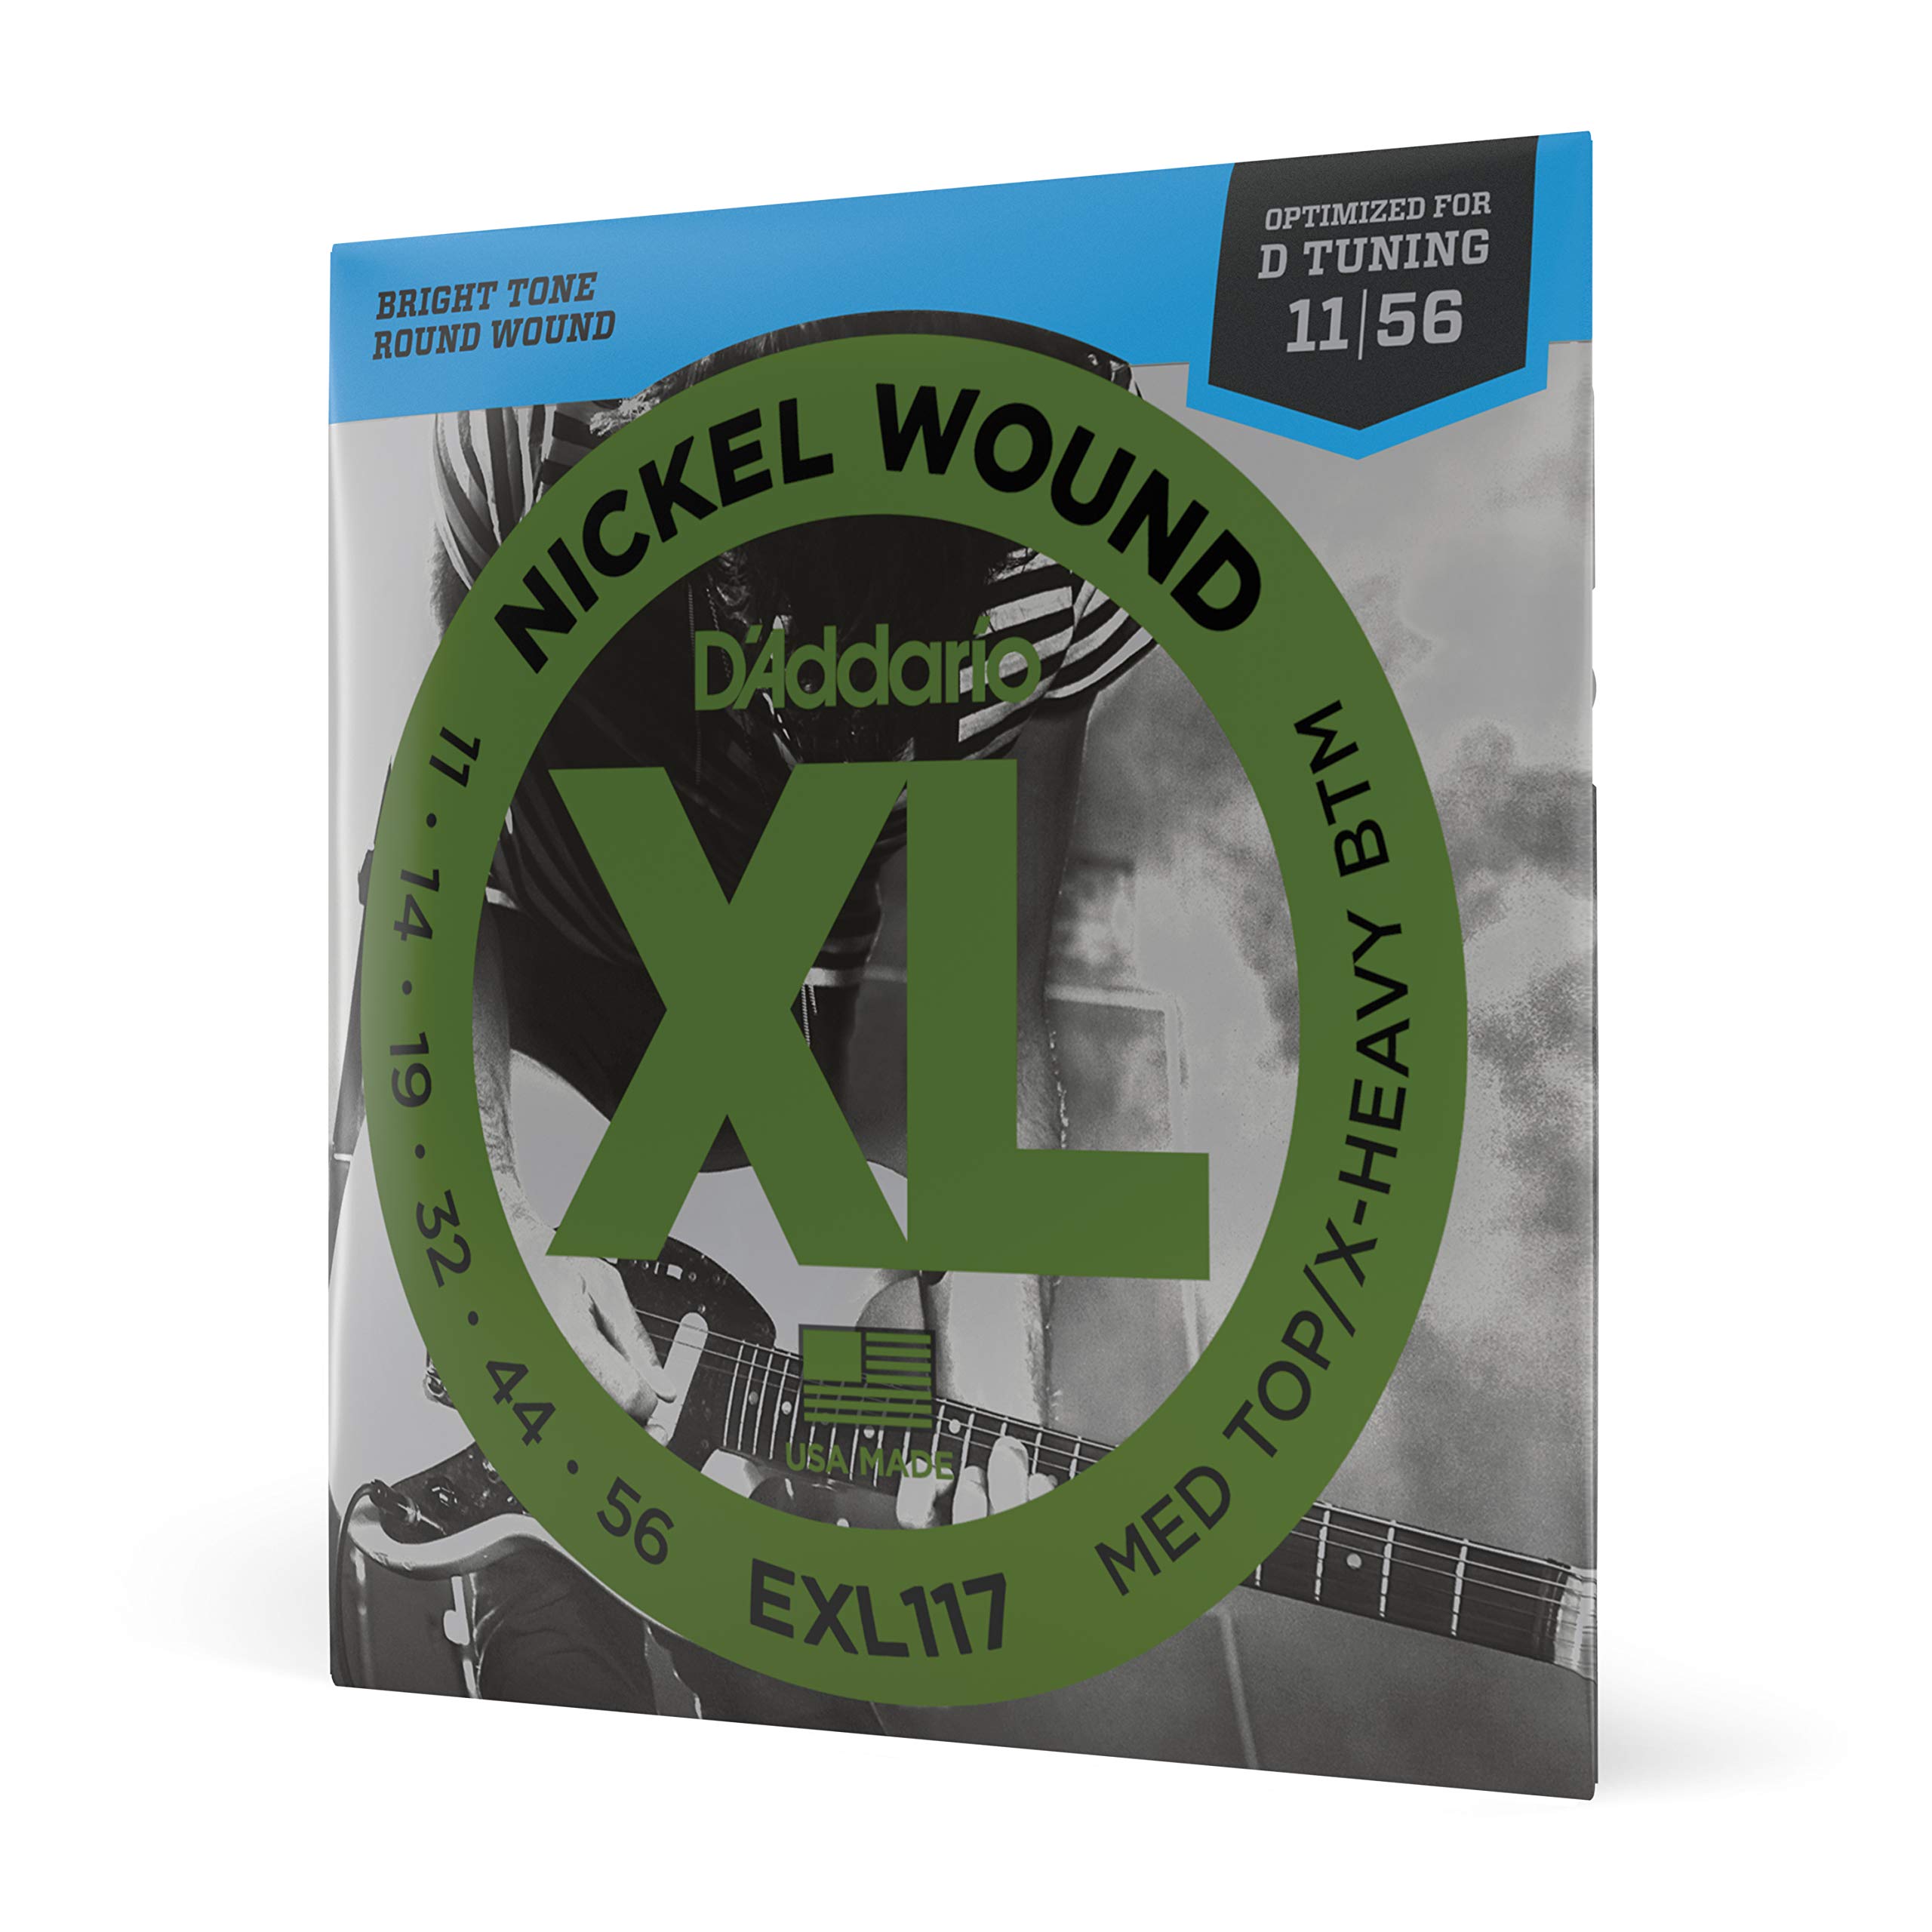 Book Cover D'Addario Guitar Strings - XL Nickel Electric Guitar Strings - EXL117 - Perfect Intonation, Consistent Feel, Reliable Durability - For 6 String Guitars - 11-56 Medium Top/Extra Heavy Bottom Med. Top/X-Hvy. Bottom, 11-56 1-Pack